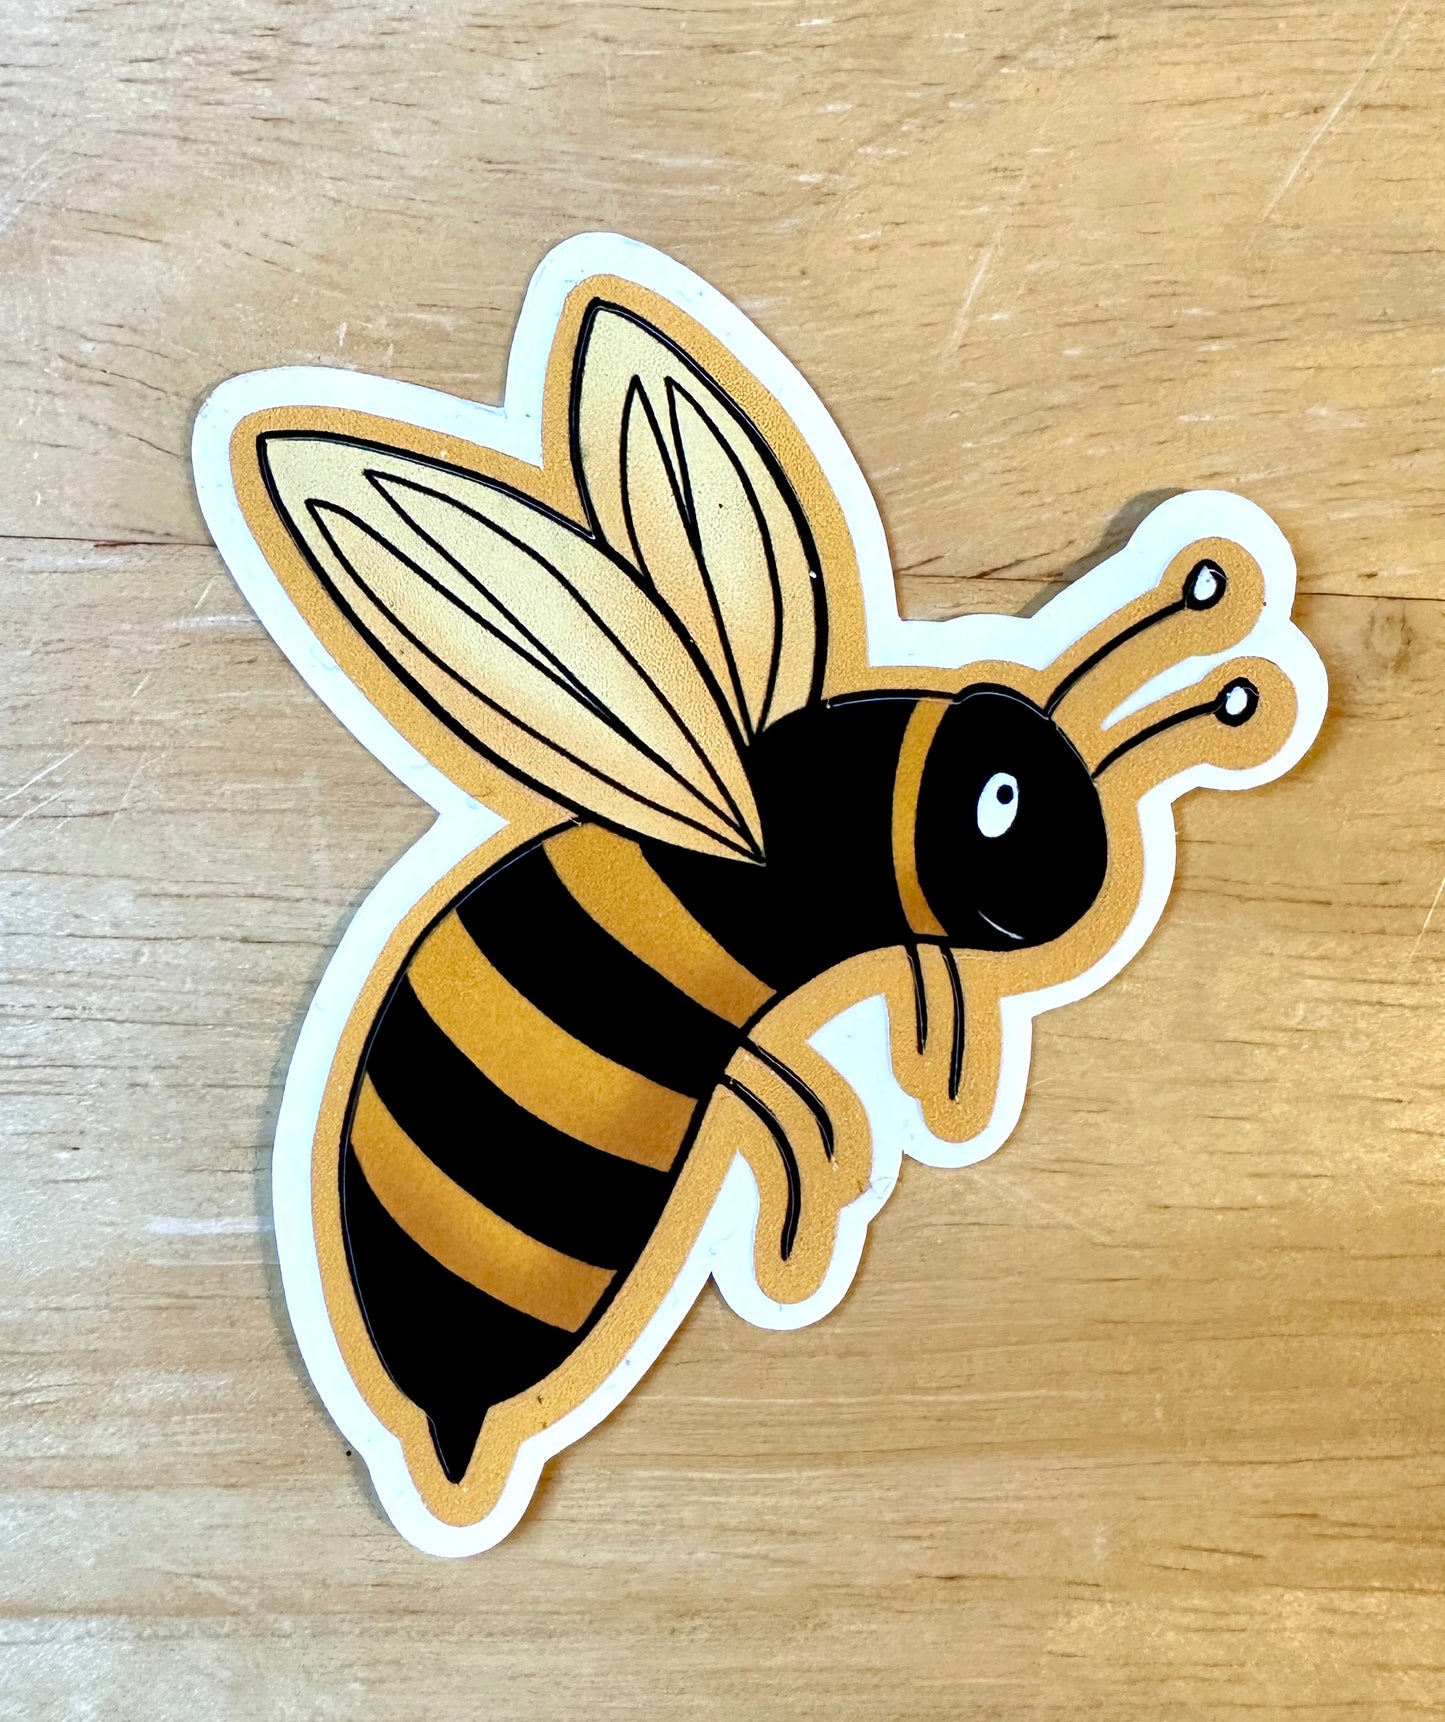 Bumble bee waterproof sticker Close up